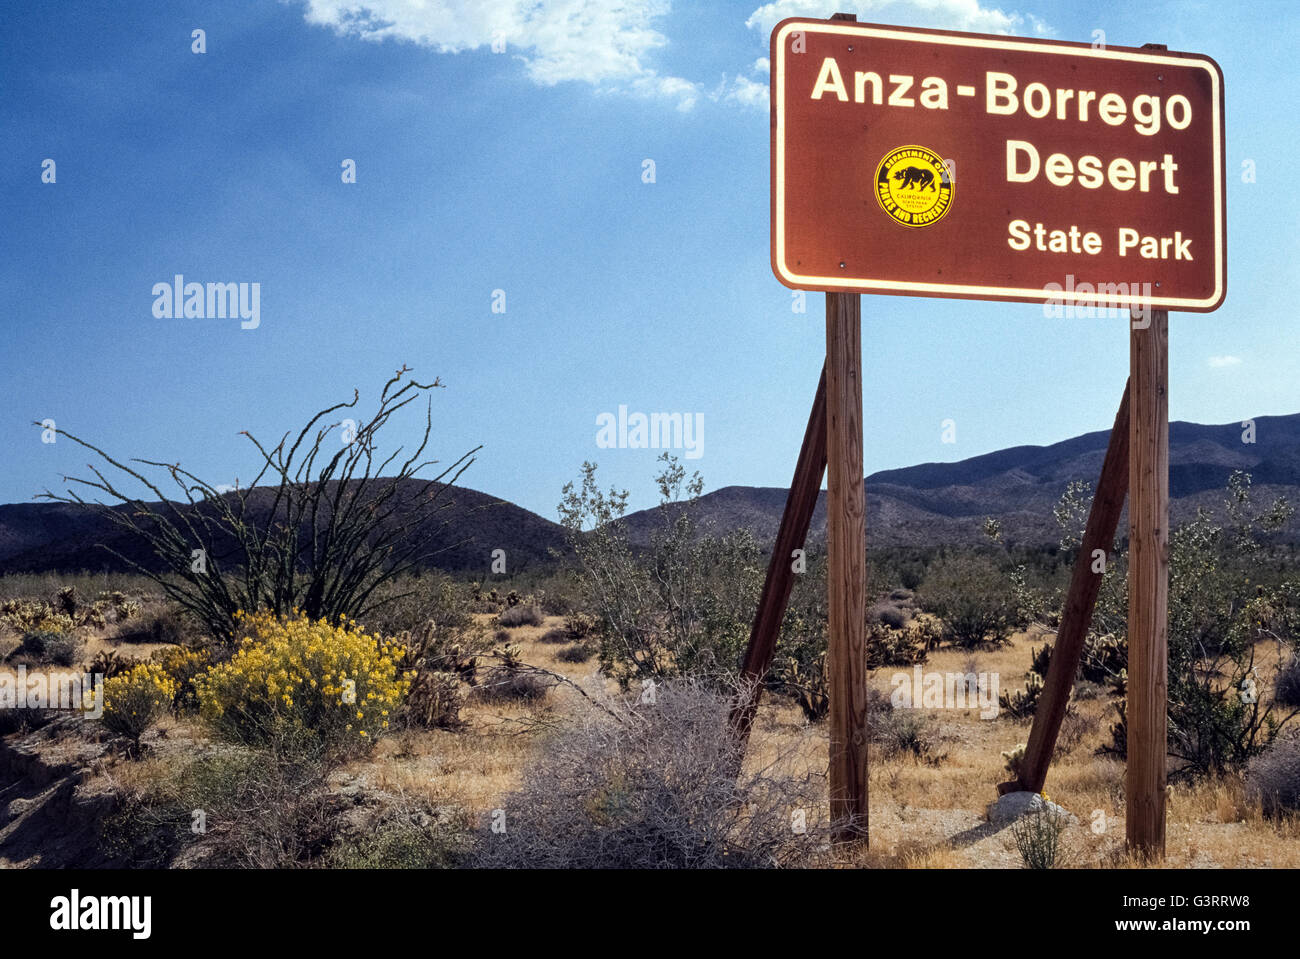 A sign welcomes visitors to Anza-Borrego Desert State Park spreads over one-fifth of San Diego County and is the largest state park in California, USA. It covers 600,000 acres (240,000 hectares) of the Colorado Desert and also reaches into Imperial and Riverside counties. The vast park is home to a host of birds, reptiles and other animals, including desert bighorn sheep. Roads and hiking trails lead visitors through spectacular displays of desert plants that are highlighted with wildflowers in springtime. Stock Photo